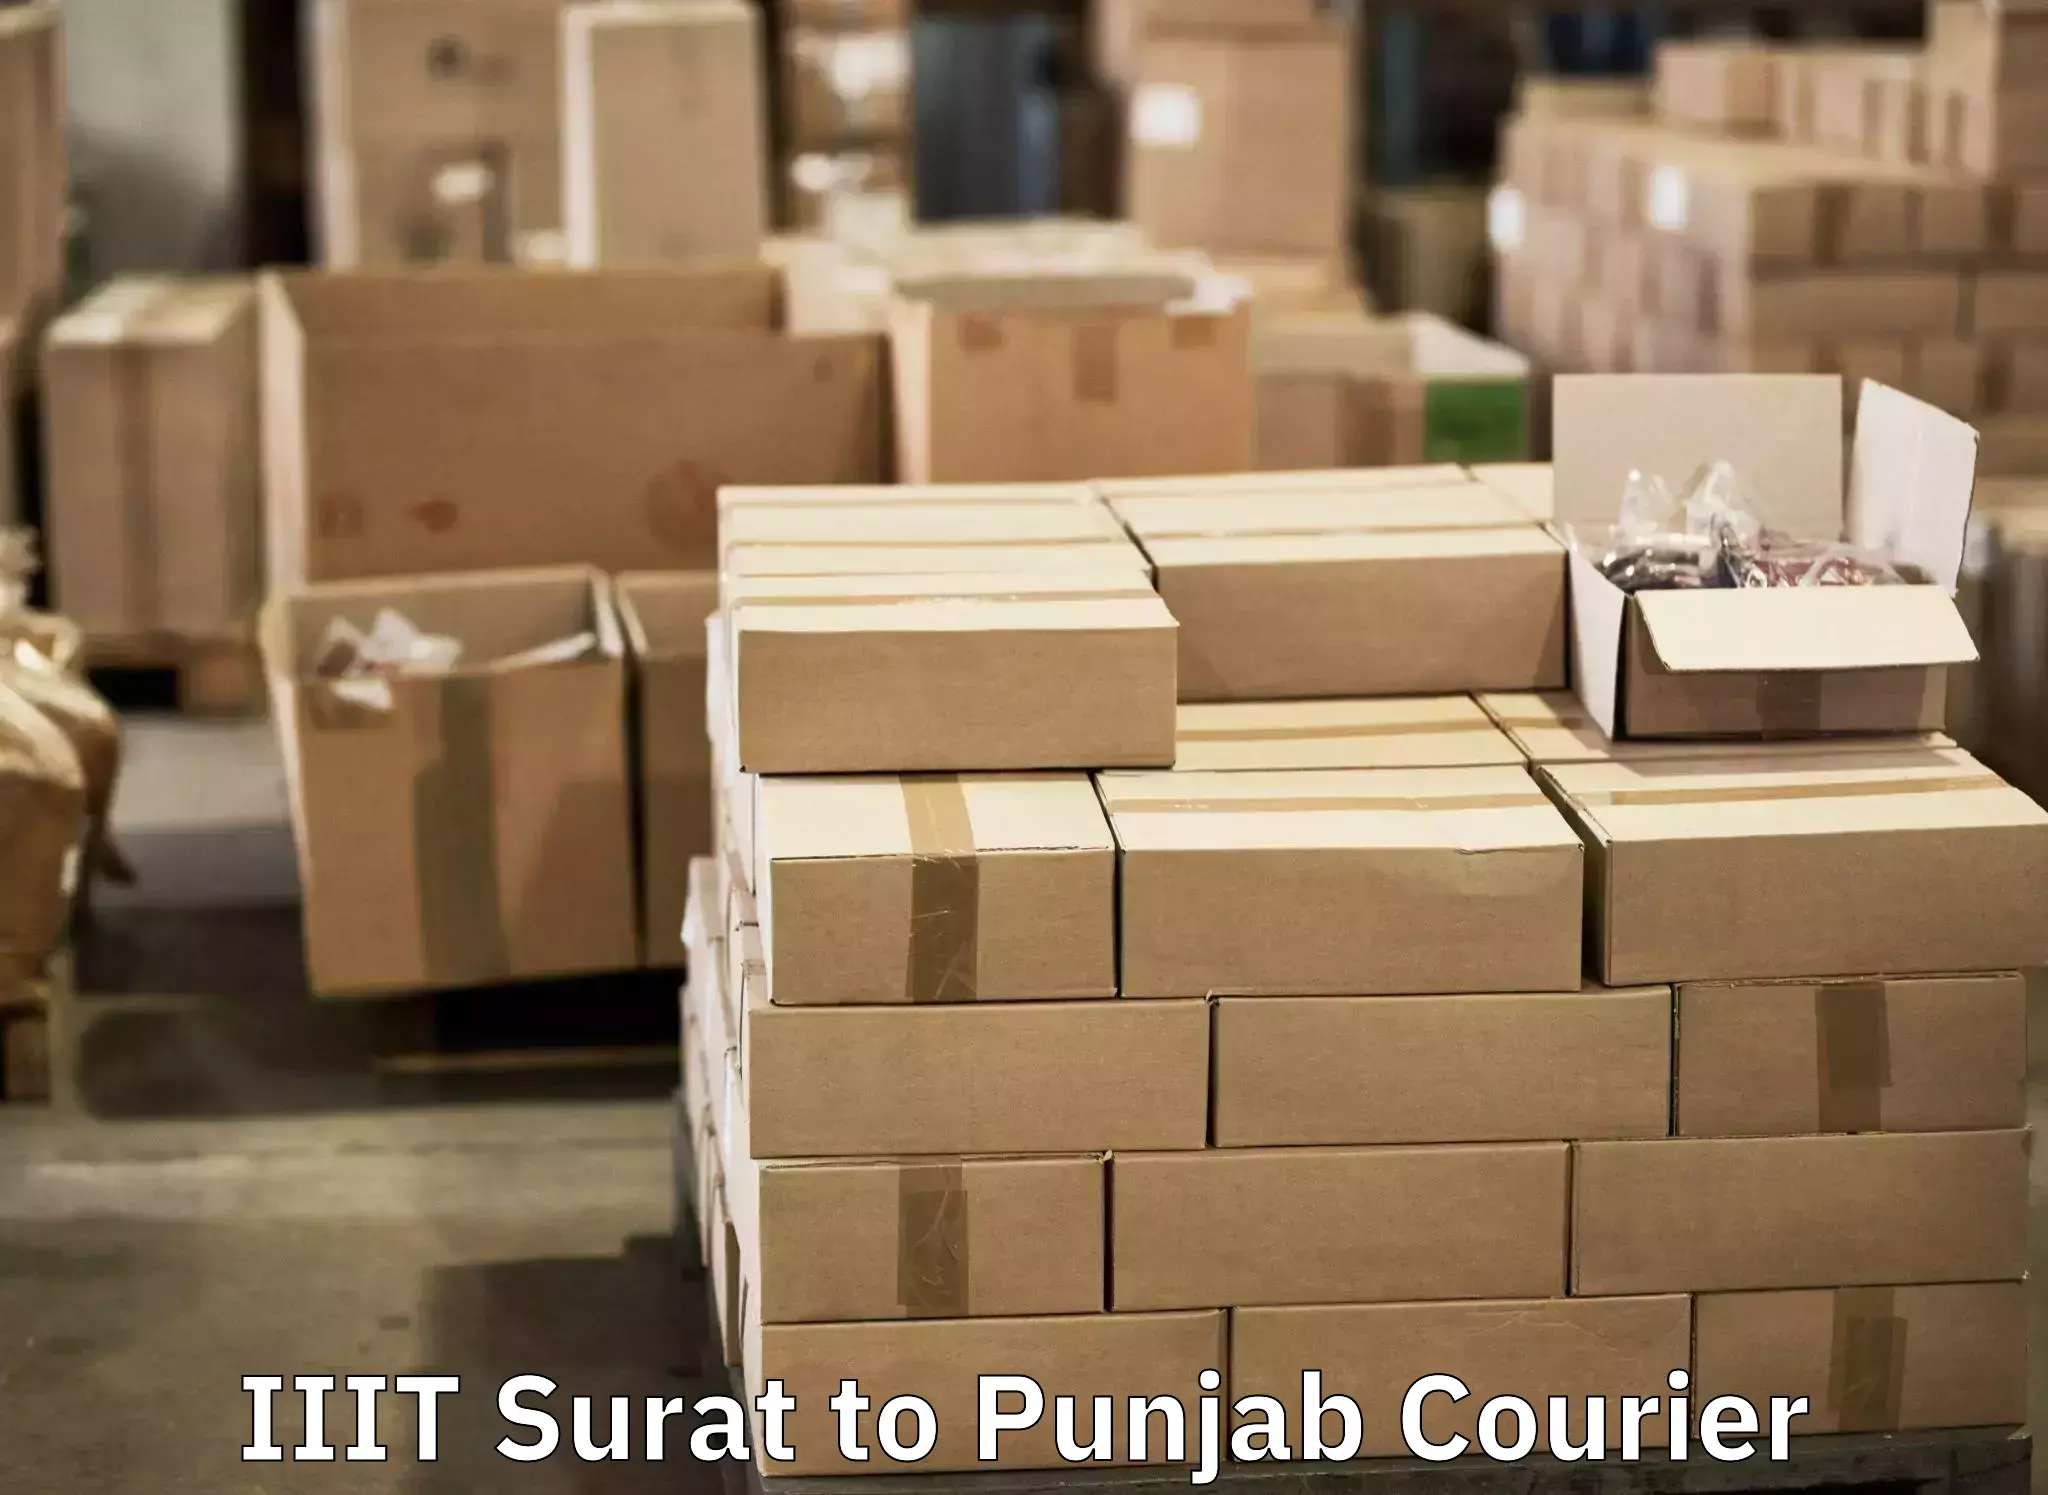 Express luggage delivery IIIT Surat to Jalandhar